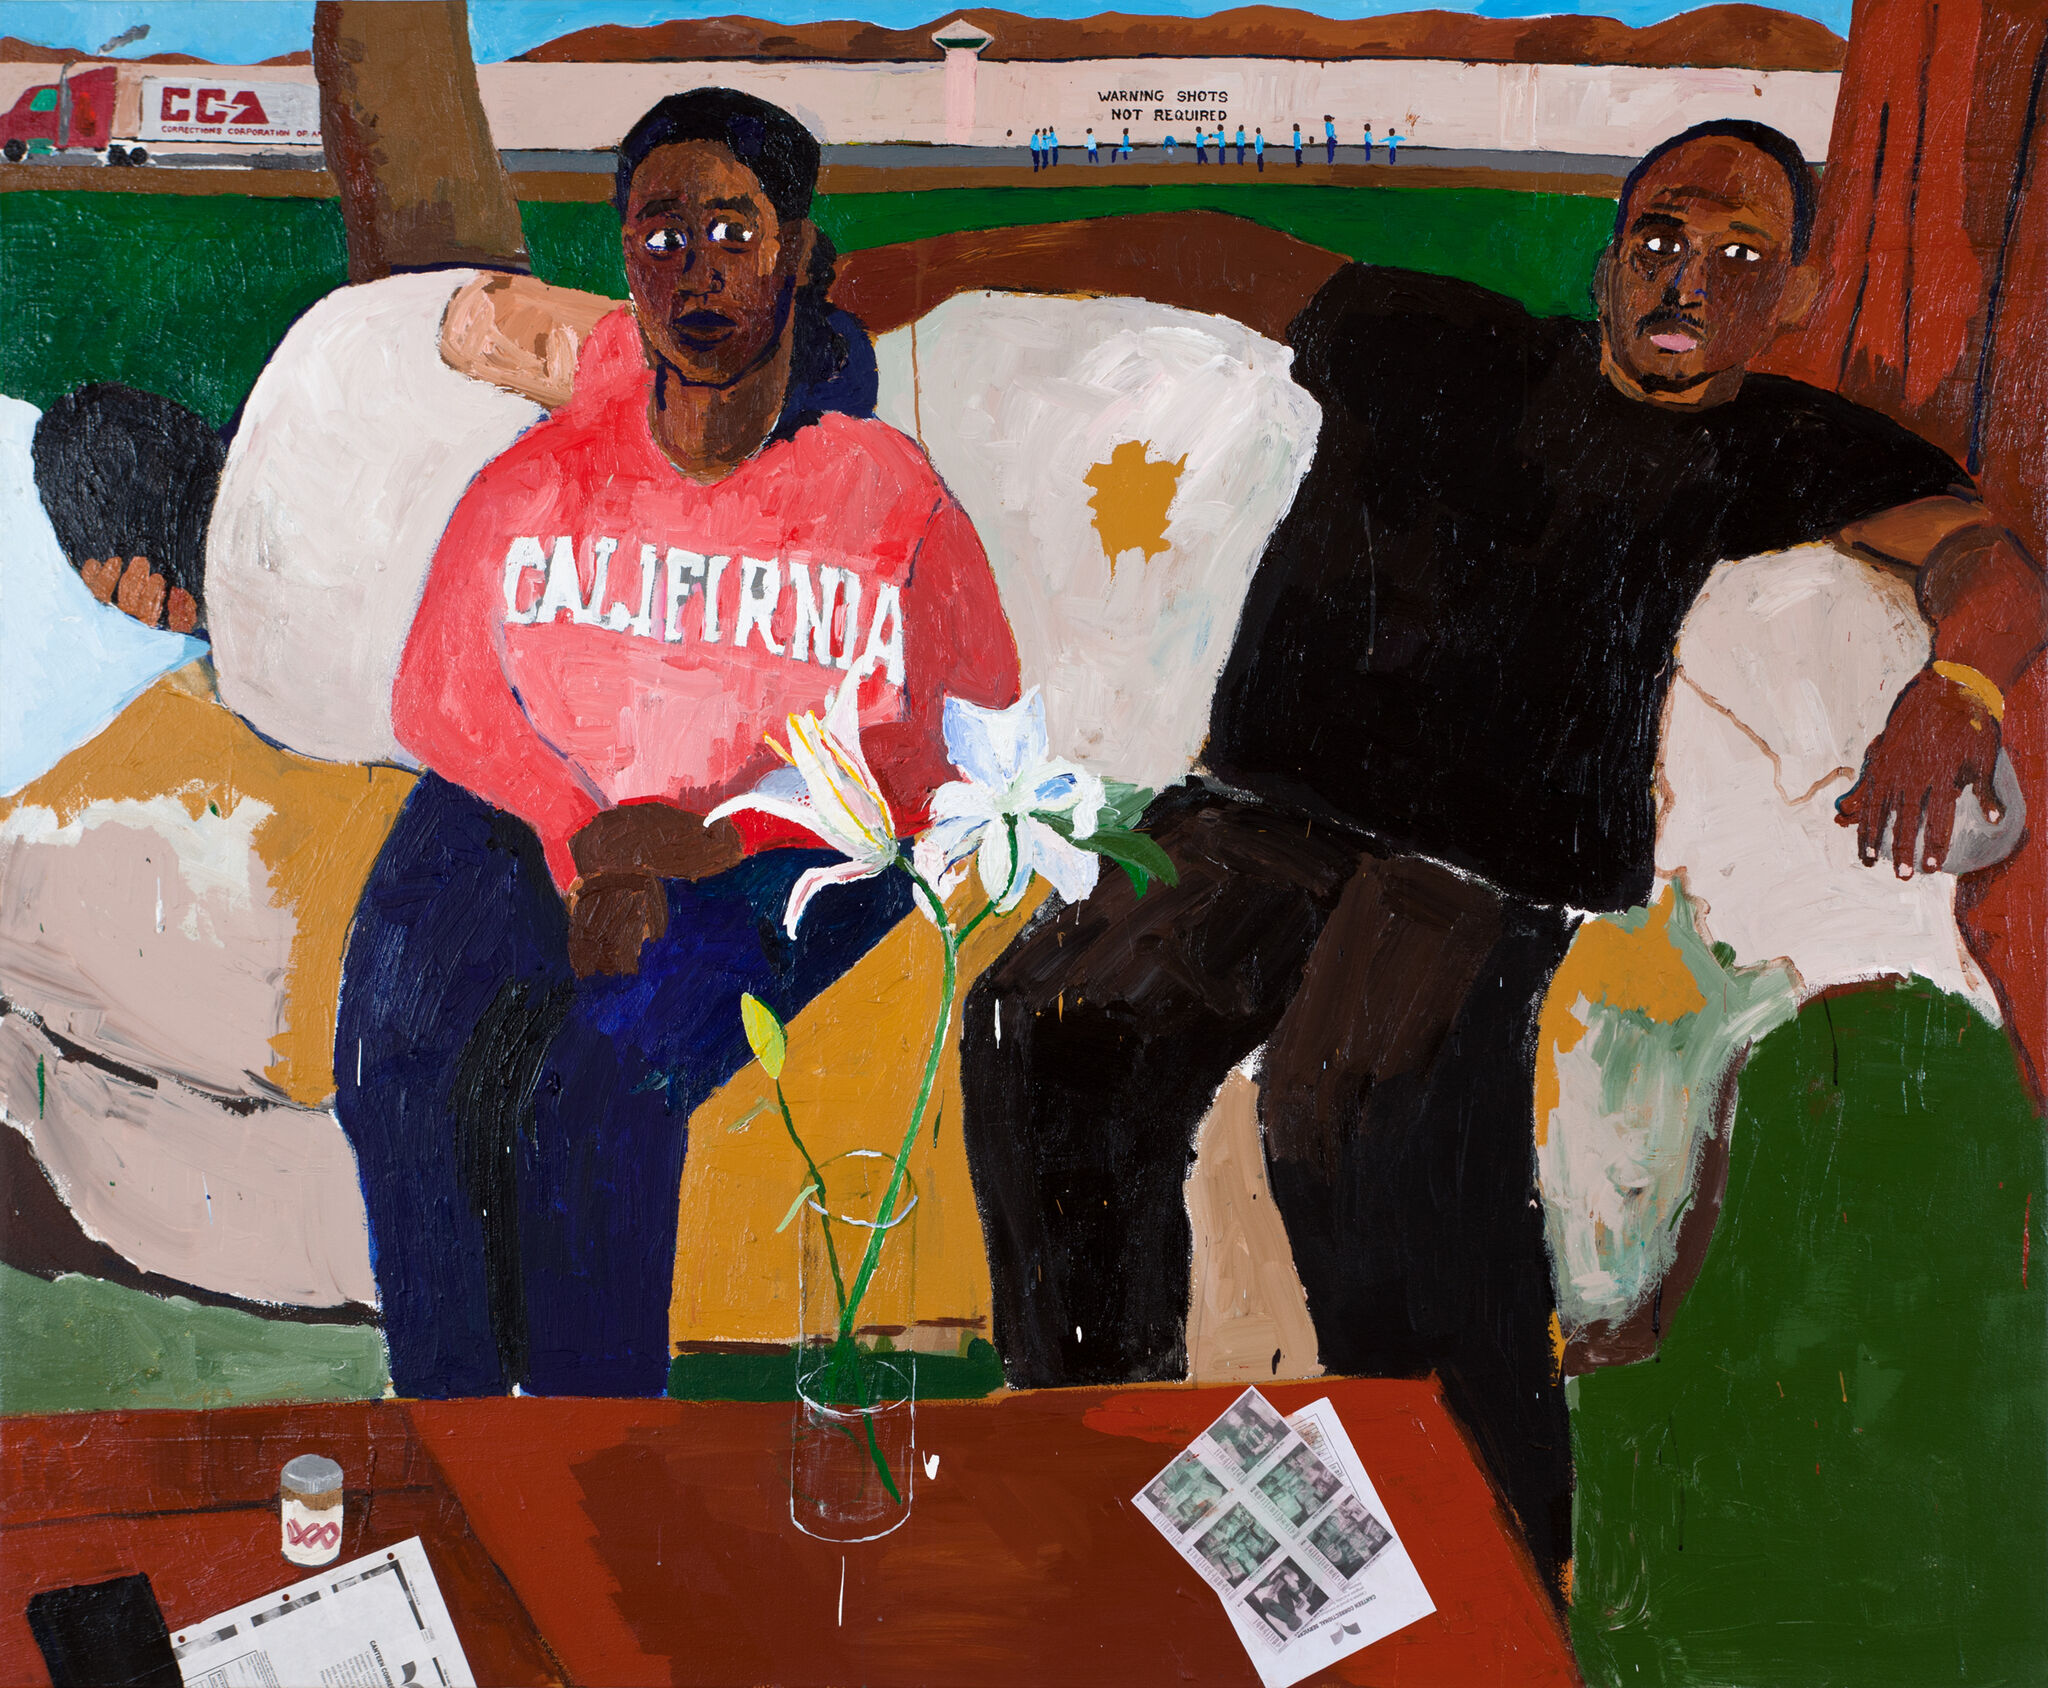 A Black woman and man sit on a couch, in front of a low cofee table. They are seated in a grassy area, with a couple of trees behind them. In the far background is a road with a white wall behind it. The words "warning shots not required" are written on the wall in black letters, and there is a small crowd of Black men in blue uniforms around this area of the wall. 